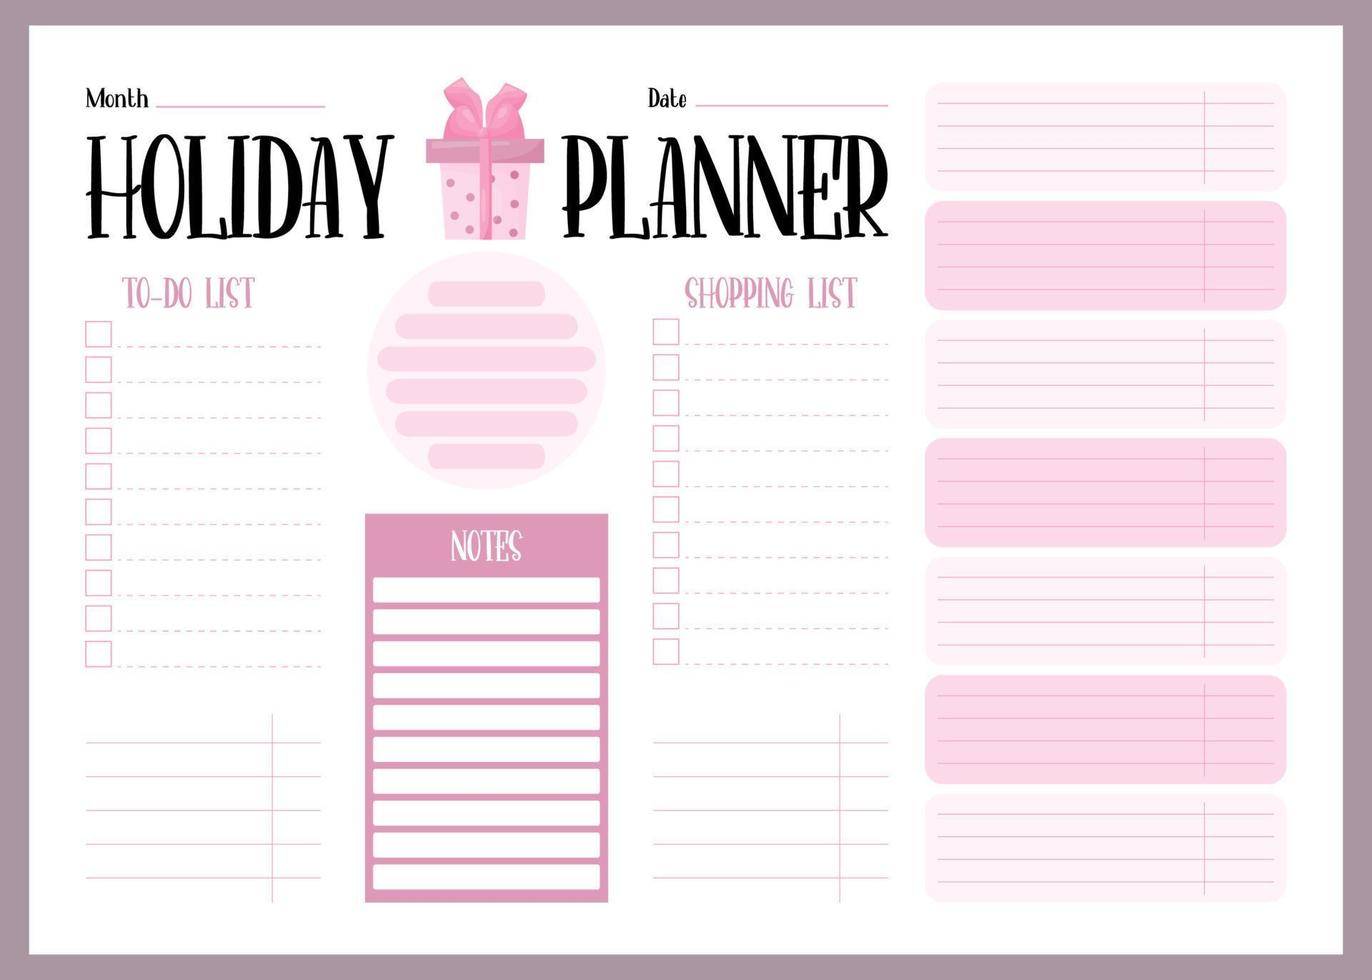 Holiday planner. Organizer, weekly list, to-do, shopping list and notes. Vector illustration. Horizontal template planner for New Years and Christmas, festive design, print, decor, stationery.